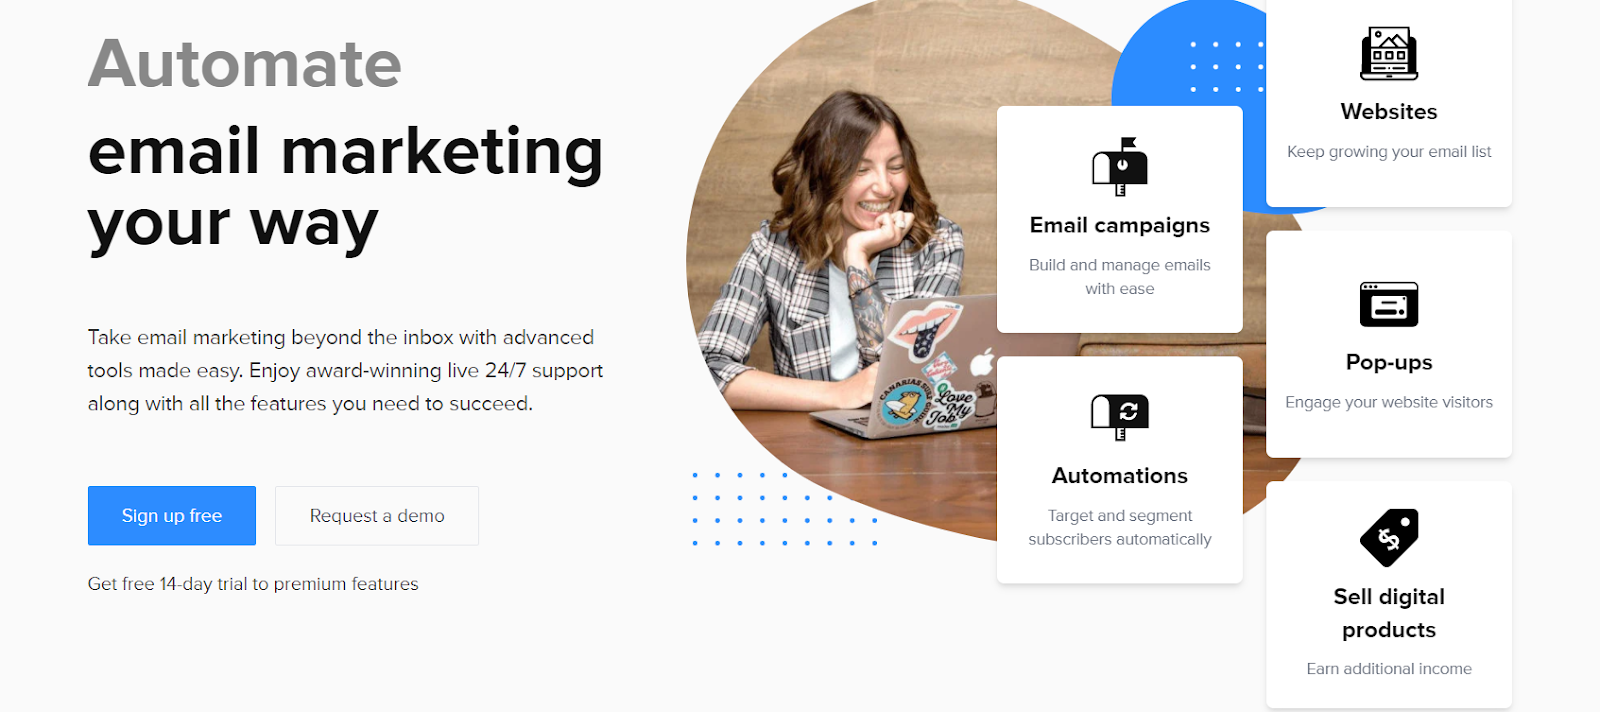 MailerLite can help you grow your email list and automate your email campaigns